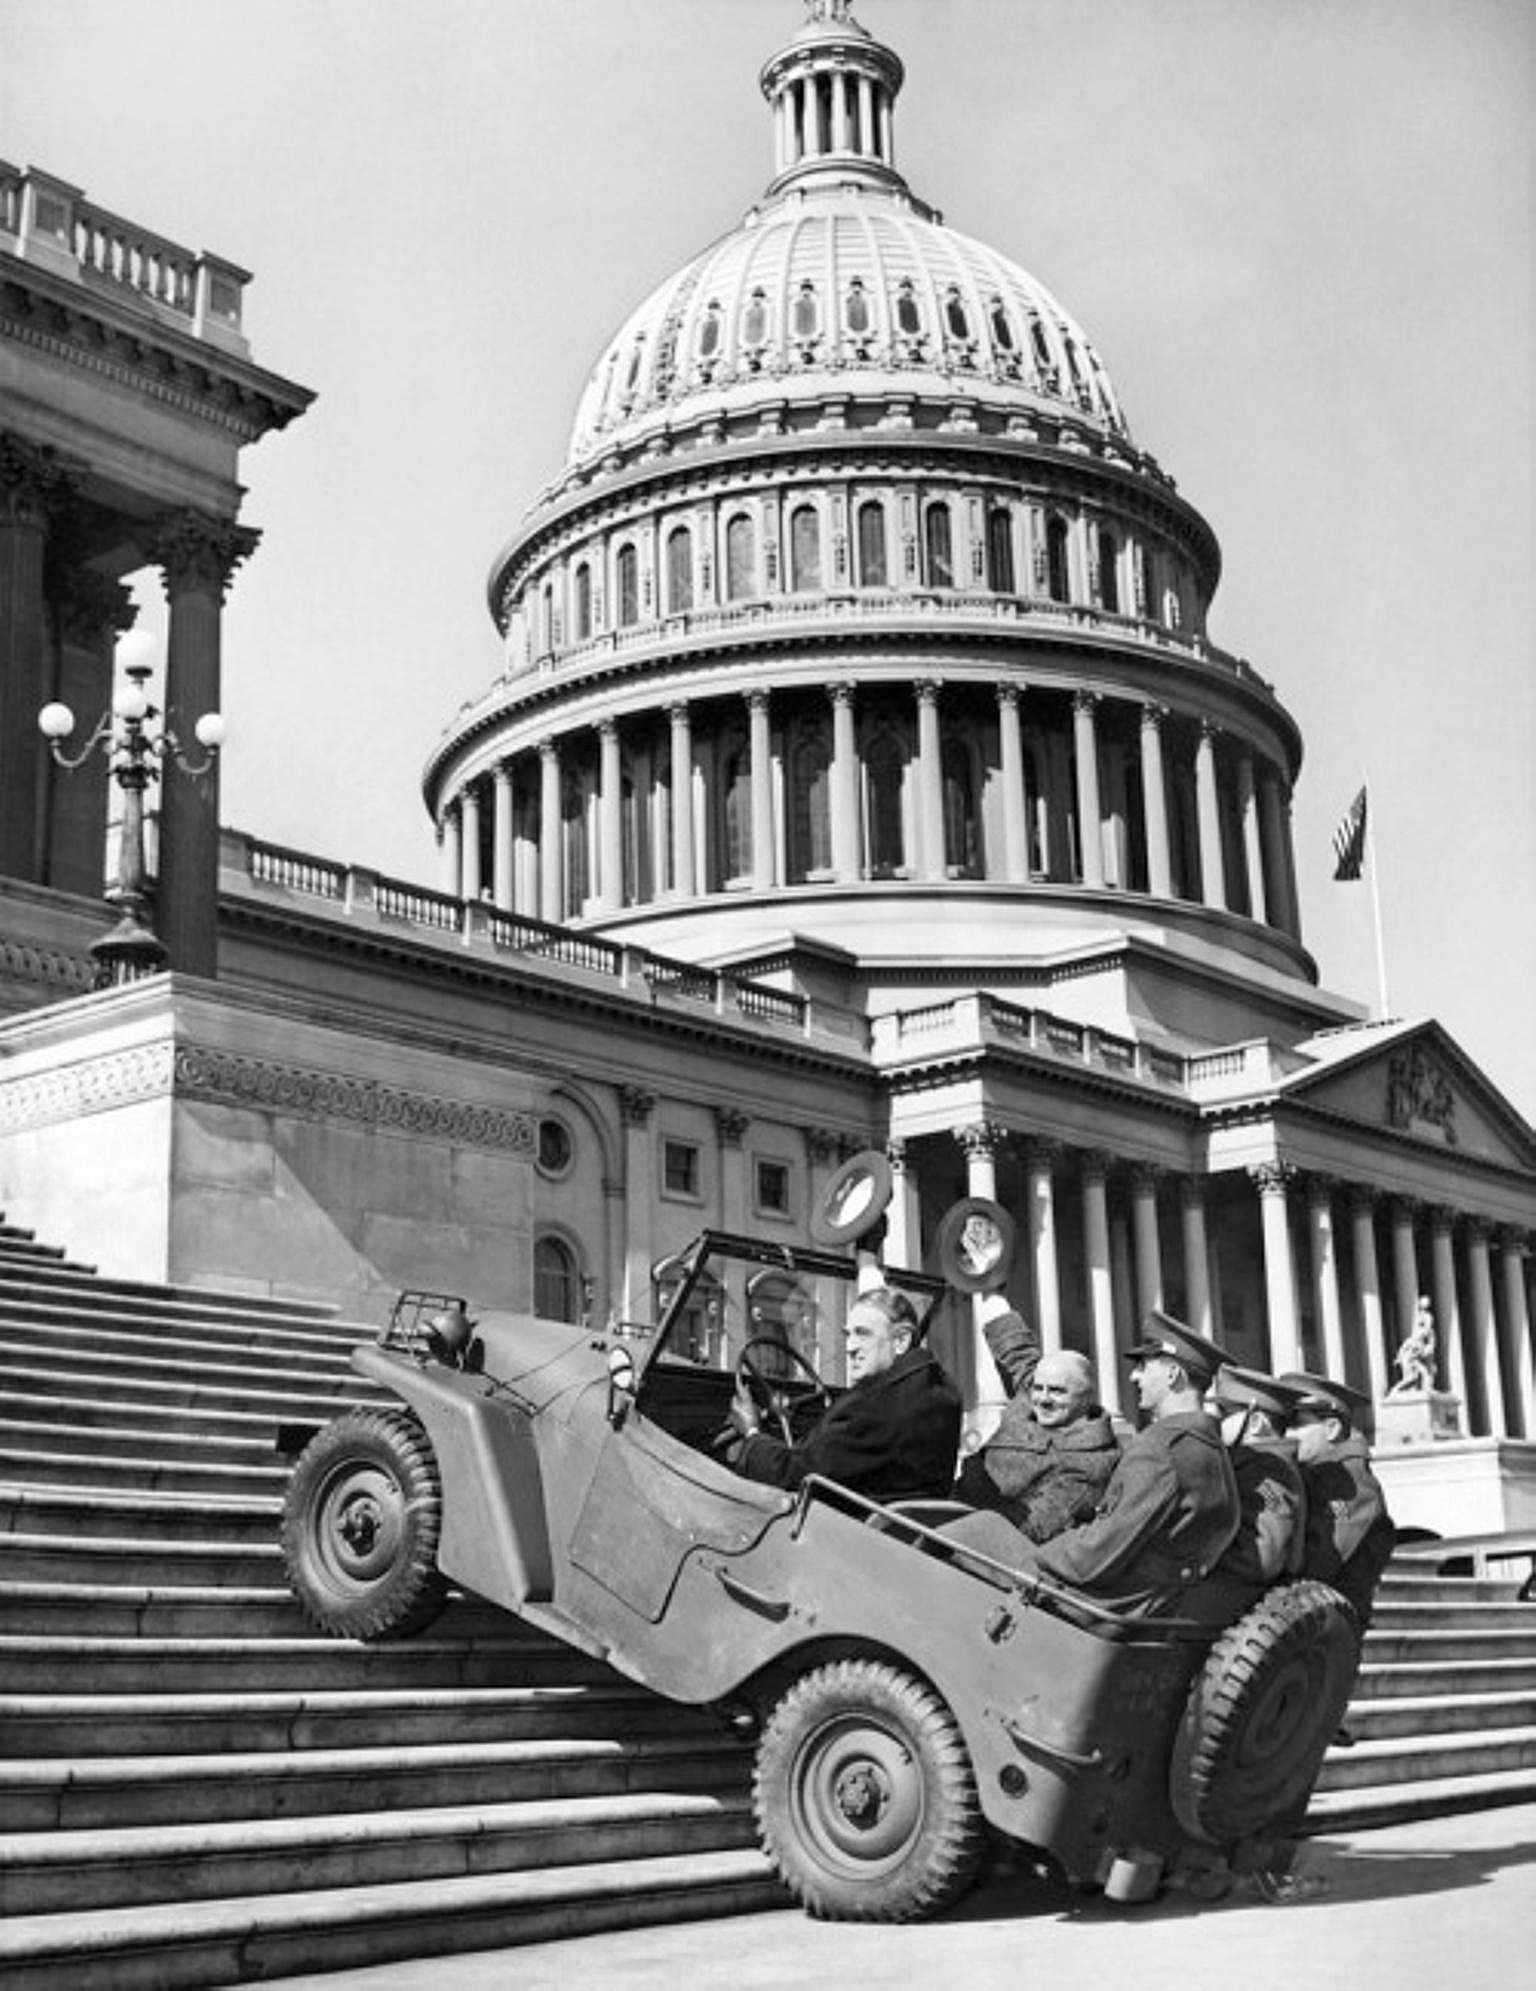 US Senators Meade and Thomas riding a Willys Quad as it climbed steps in front of the US Congress building, Washington, DC, United States, seen on 20 Feb 1941 issue of newspaper Washington Daily News